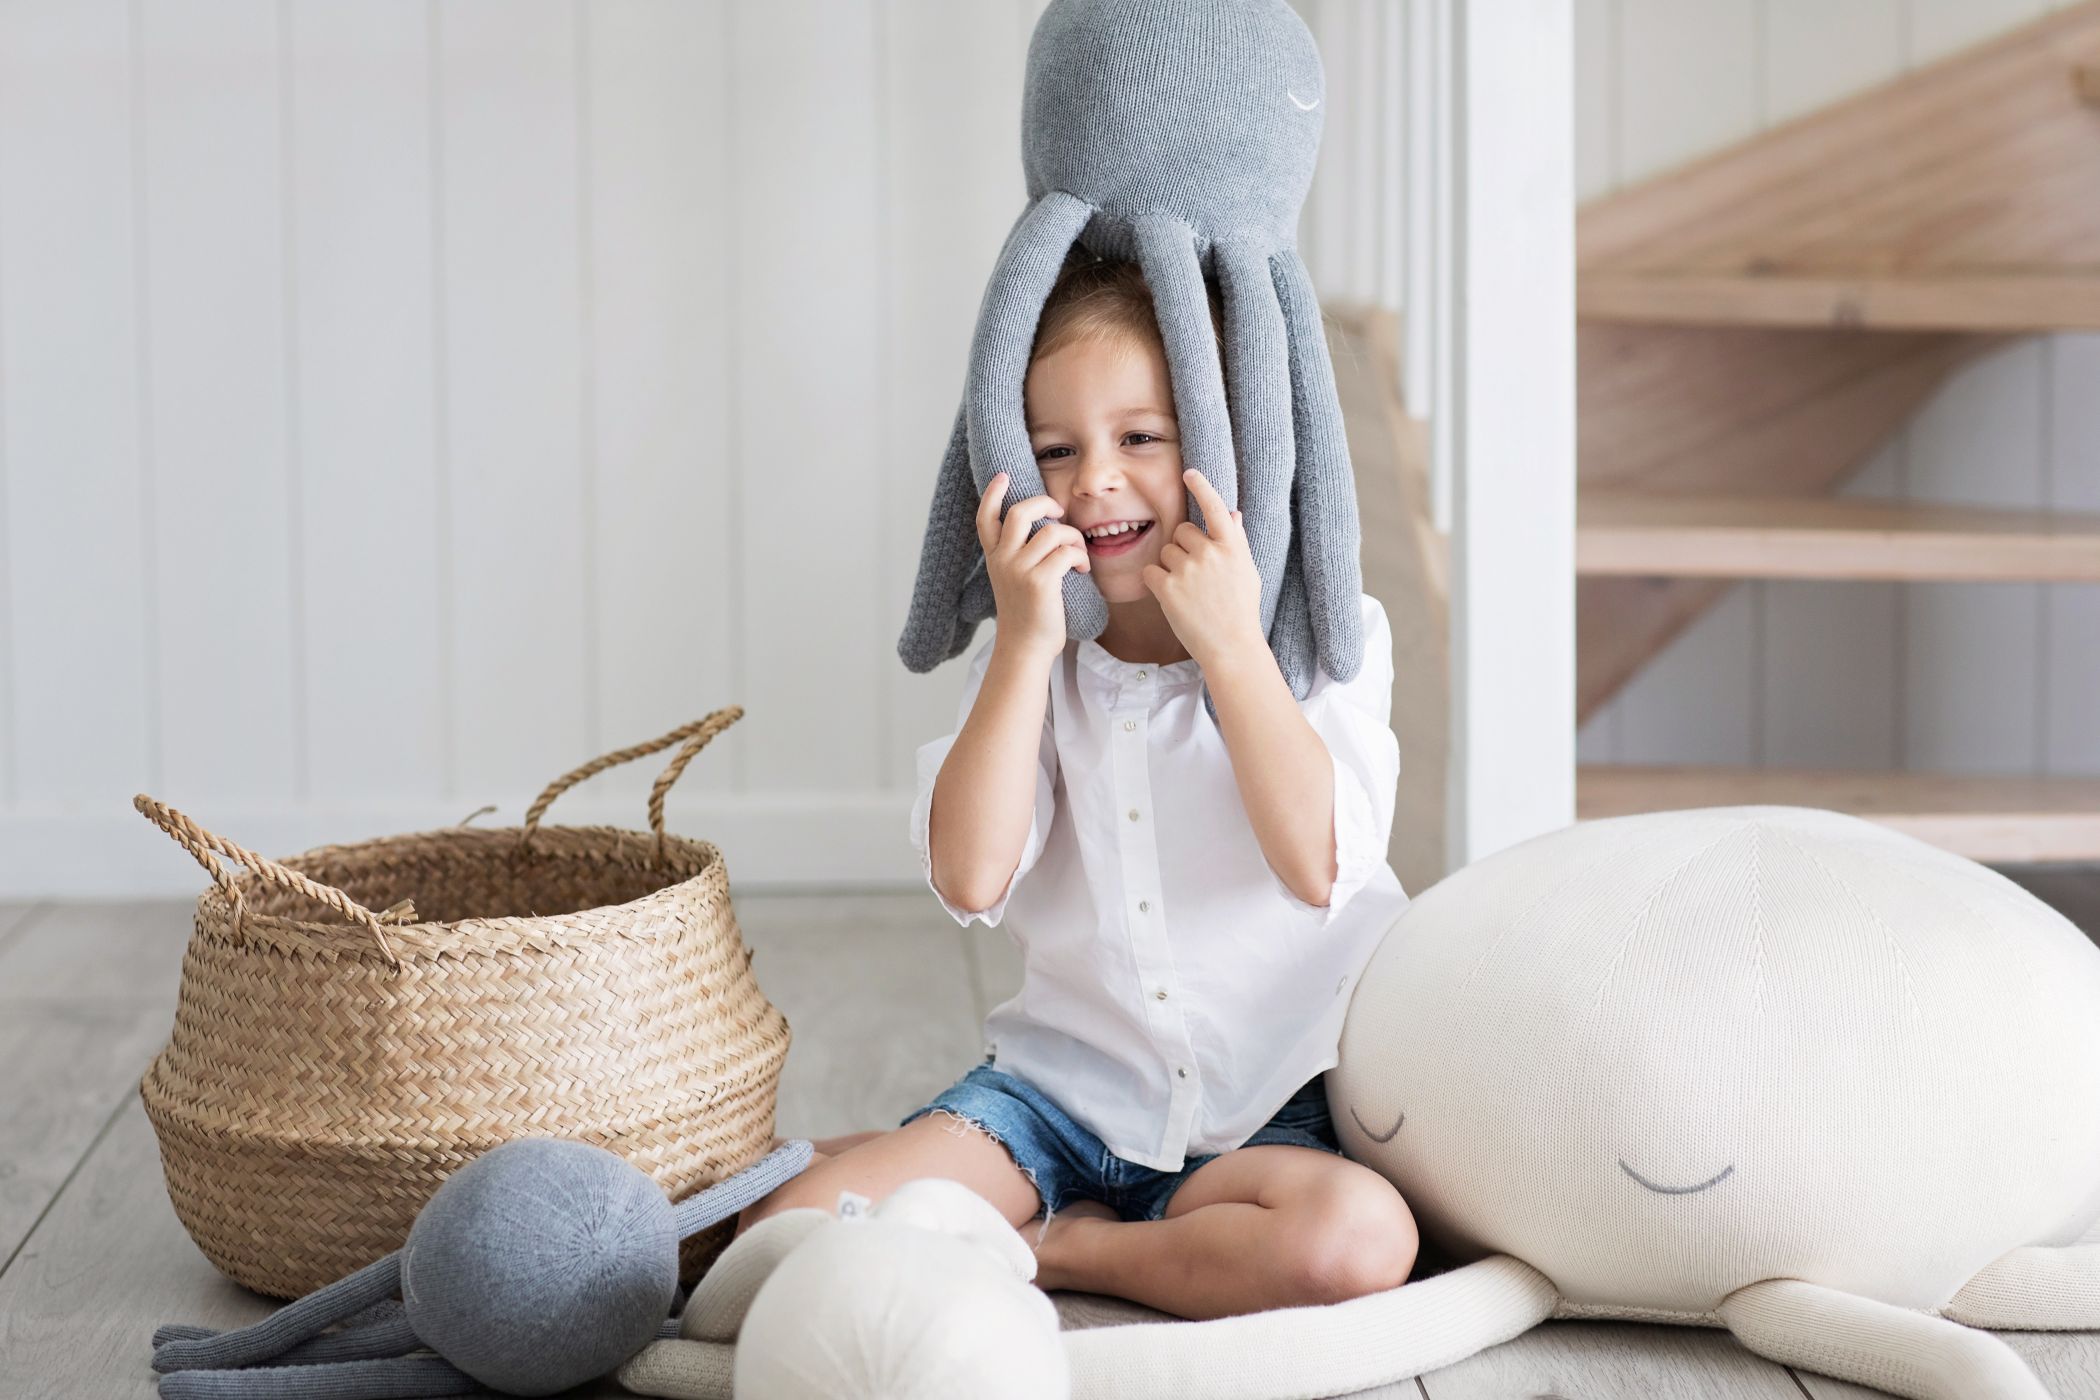 Poofi – Octopus Cuddle Toy